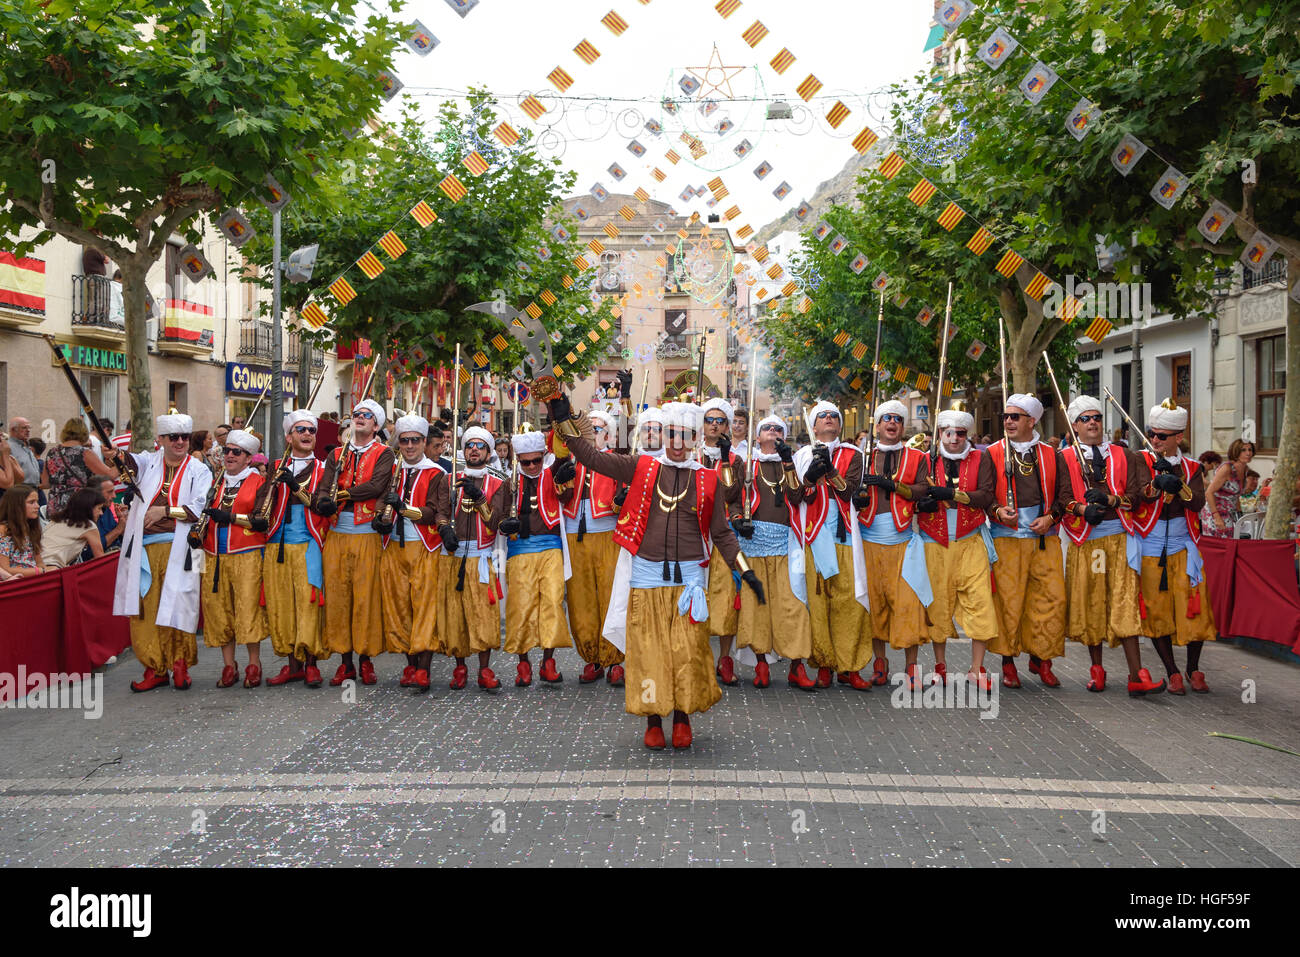 Group in traditional clothing, Moors and Christians Parade, Moros and Cristianos, Jijona or Xixona, Province of Alicante Stock Photo